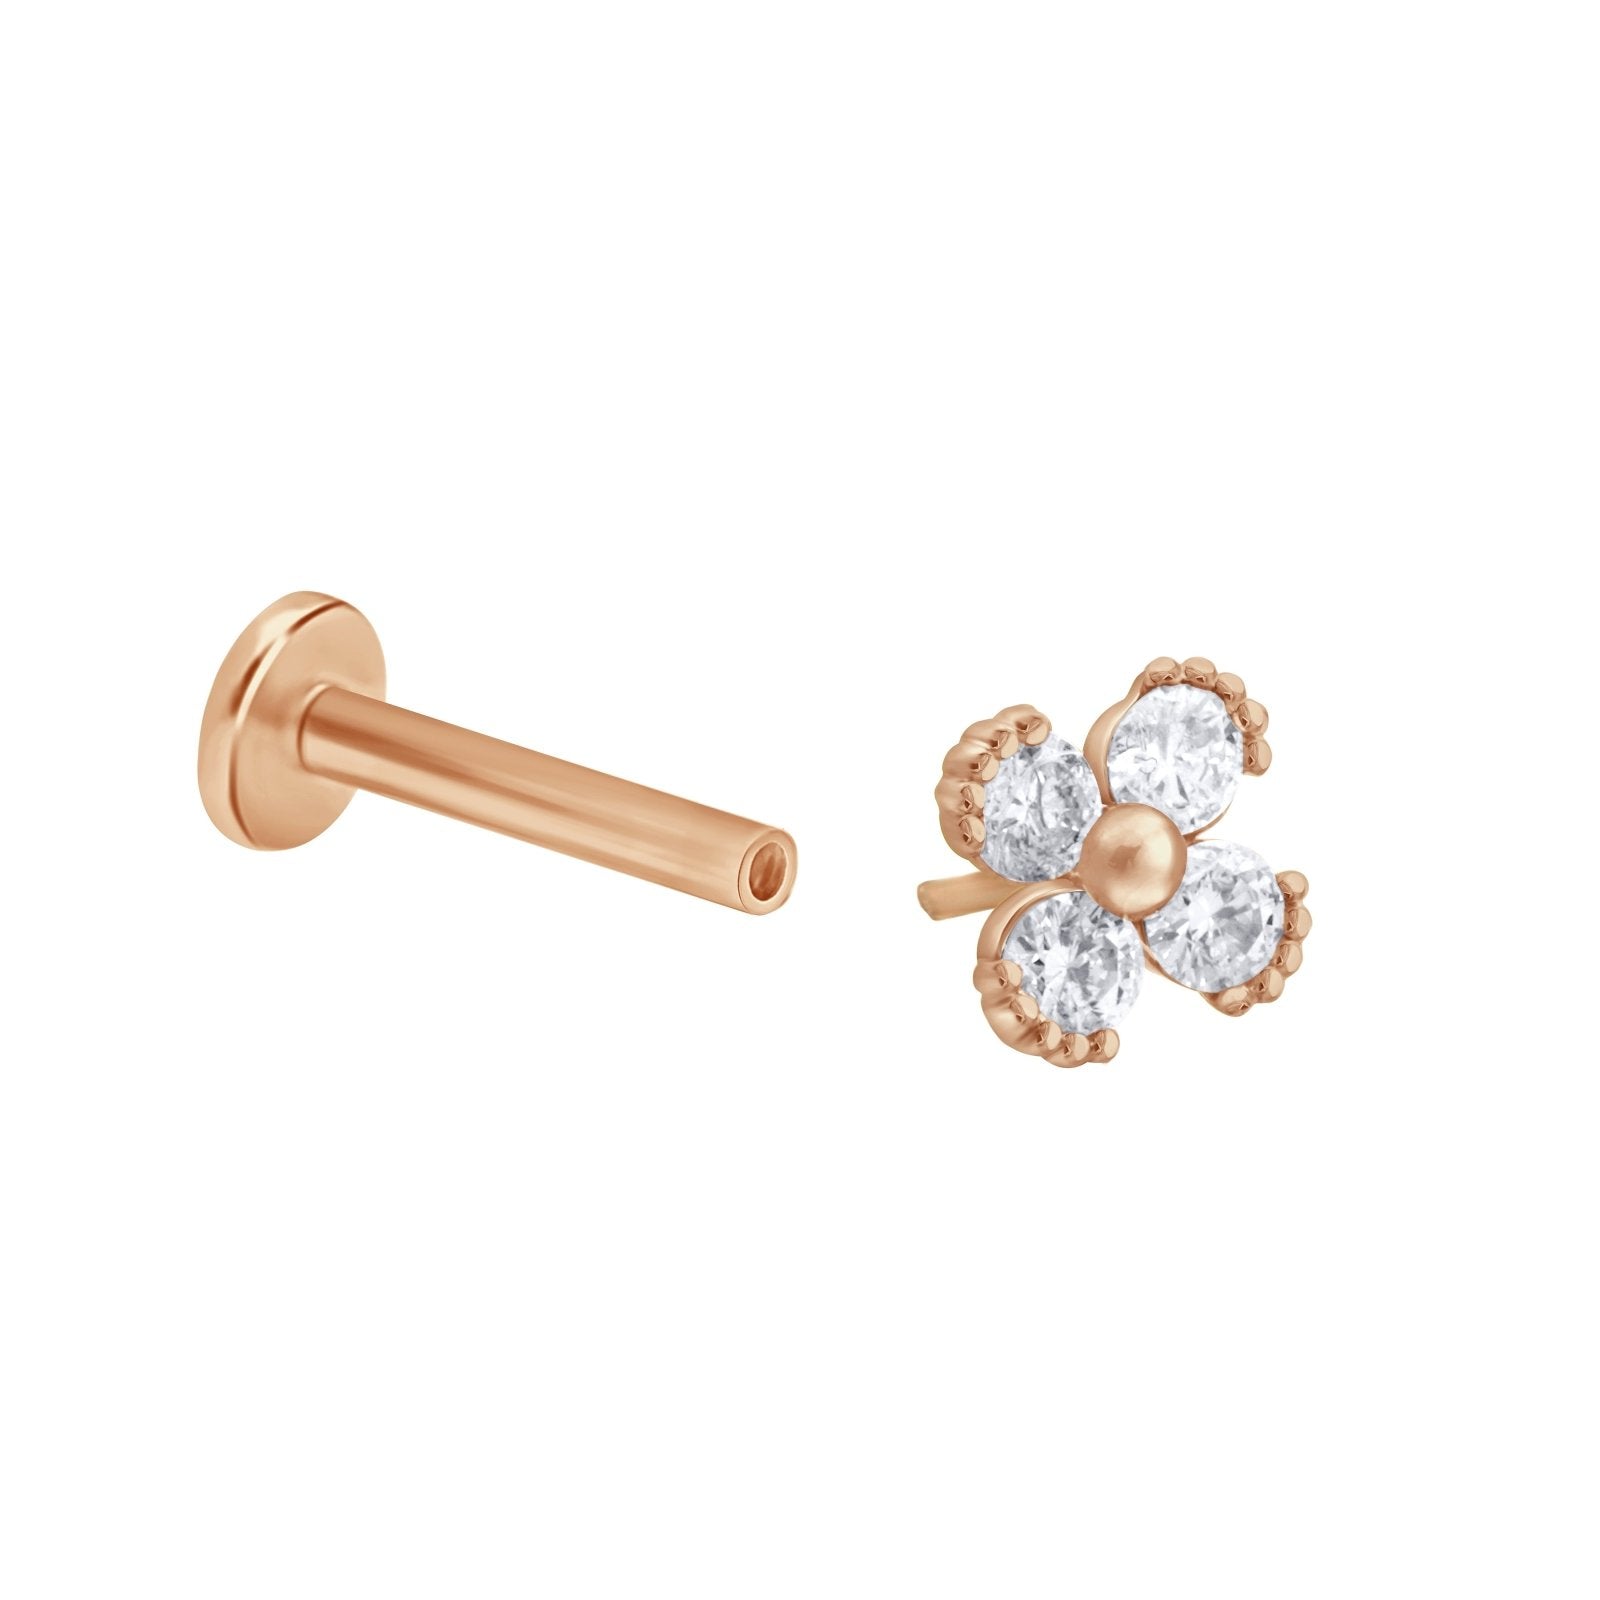 Beaded Diamond Four Petal Flower Flat Back Stud Earrings Estella Collection #product_description# 17925 14k Birthstone Cartilage Earring #tag4# #tag5# #tag6# #tag7# #tag8# #tag9# #tag10# 5MM